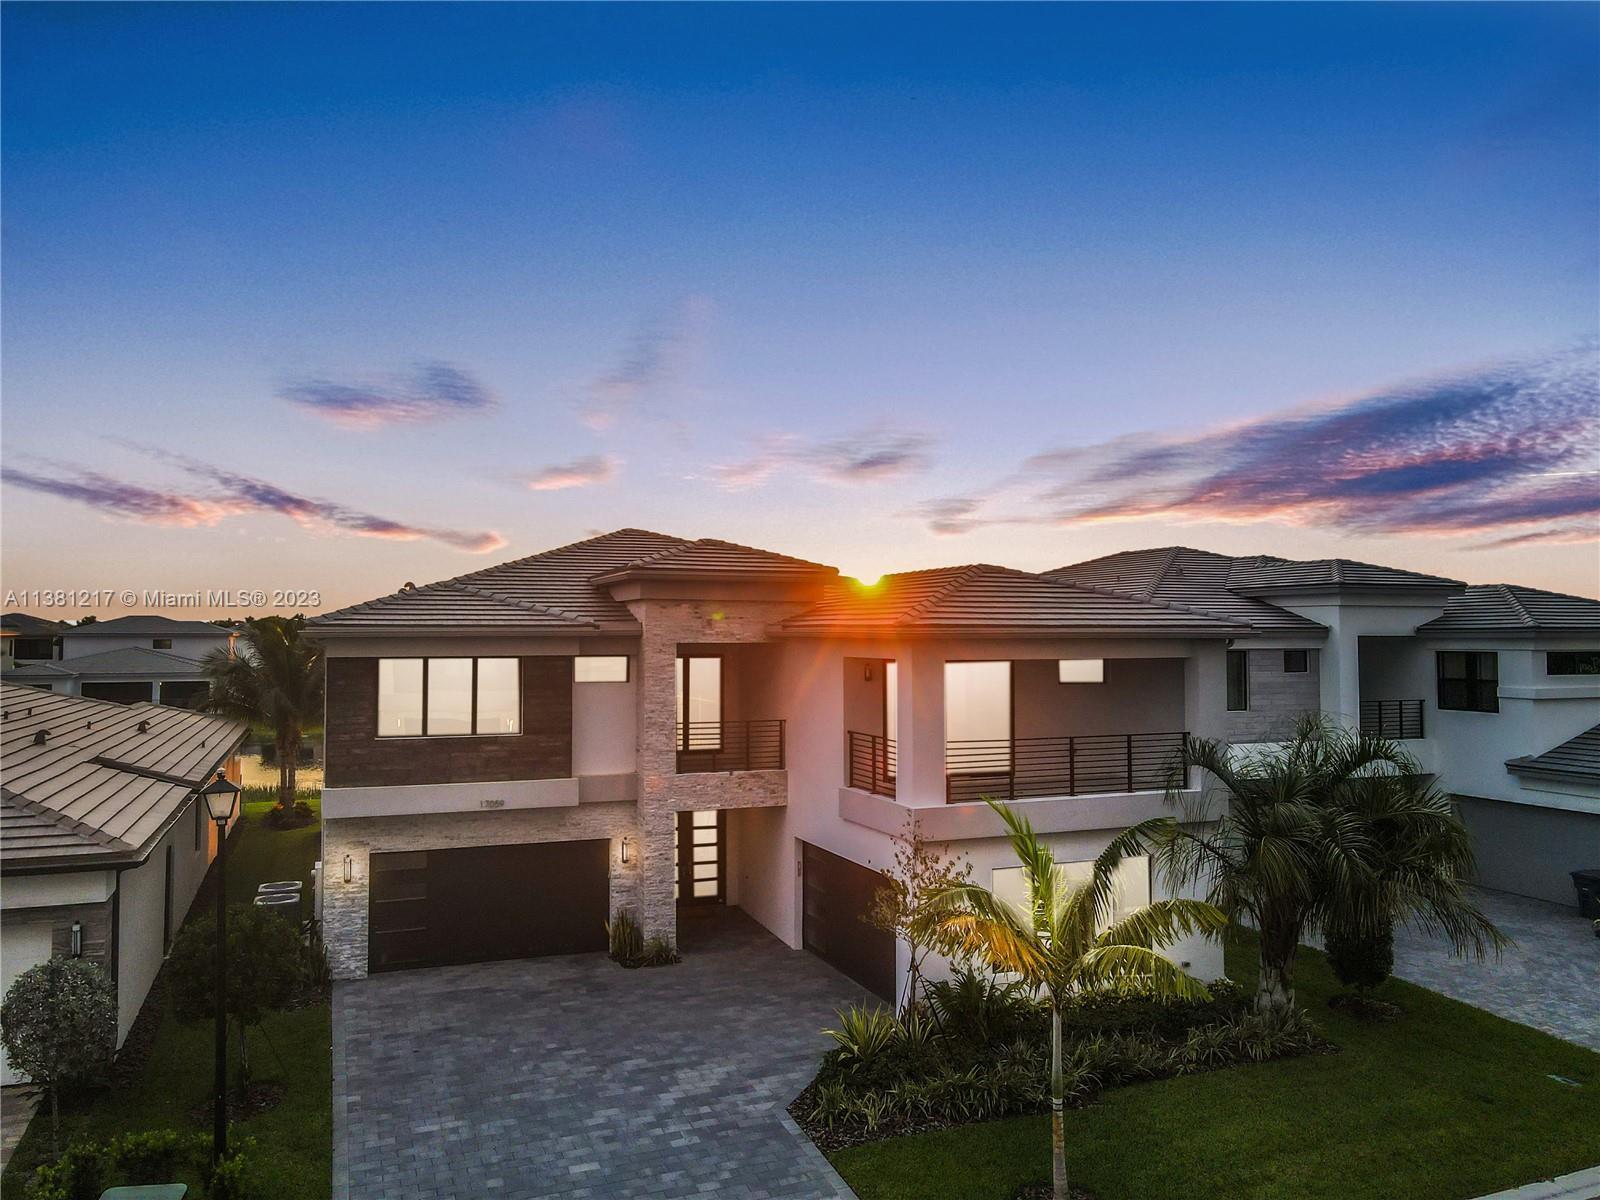 Price Improvement!
Come see this spectacular move in ready Maldives Premium Model home with high en